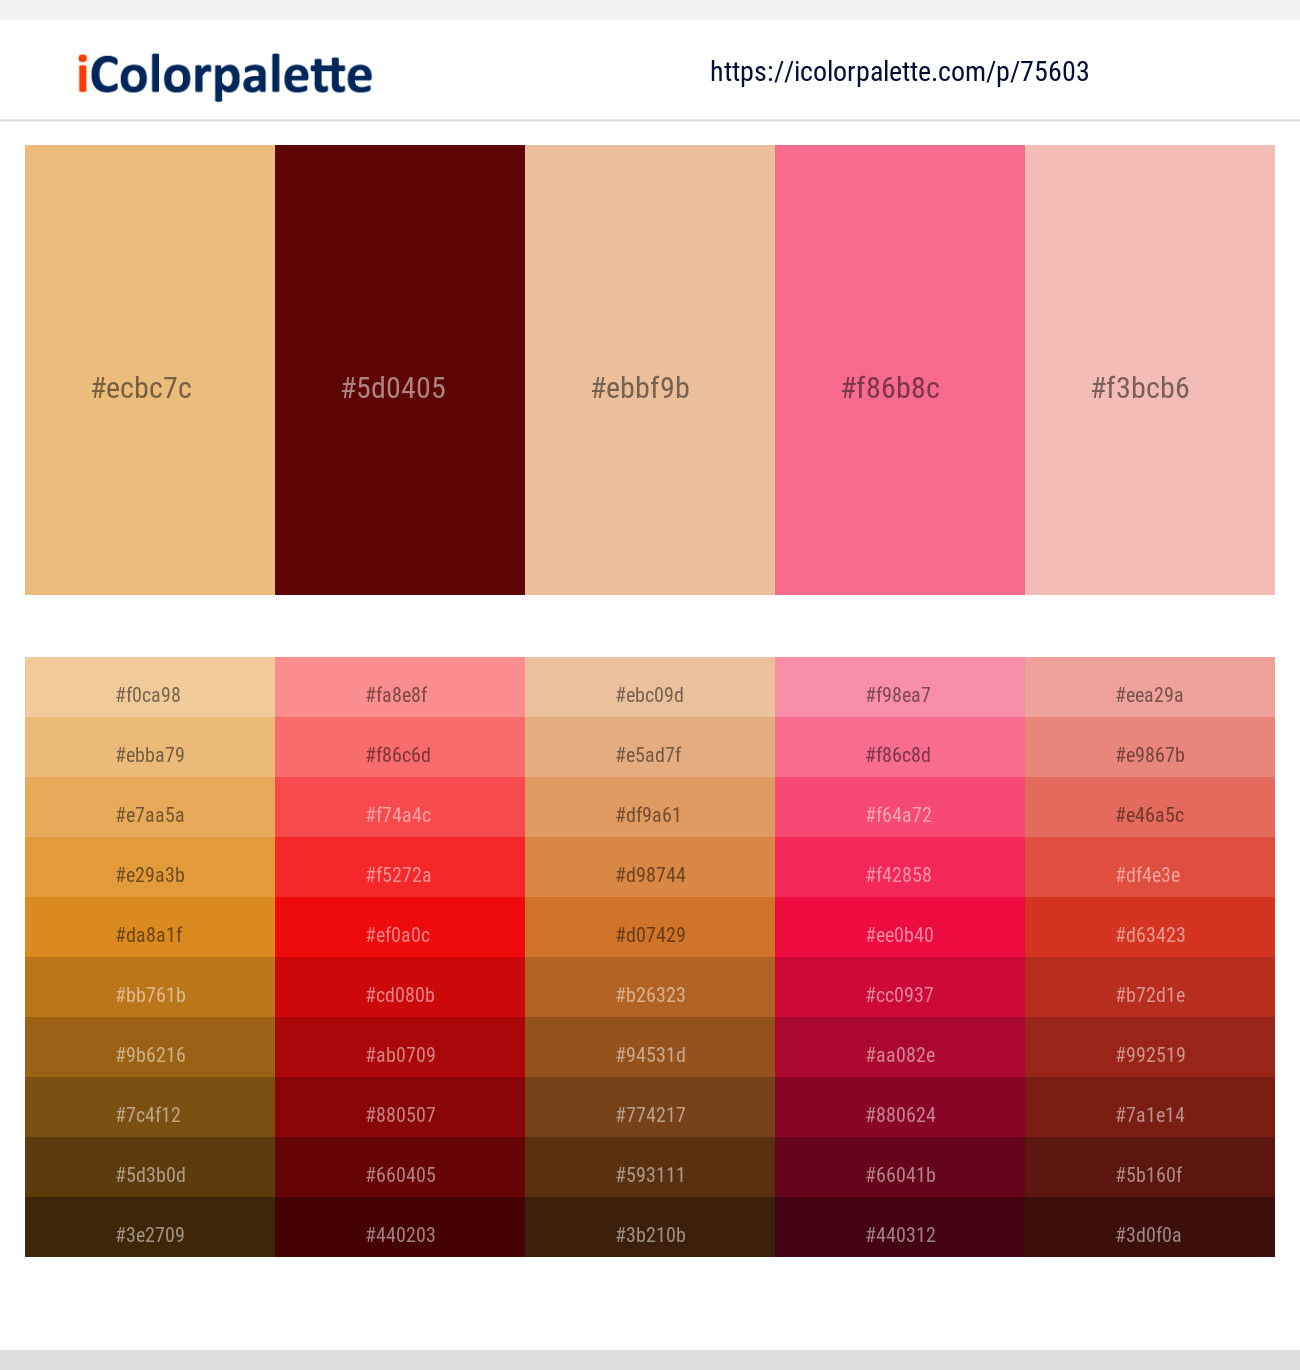 Red Pink White Color Palette